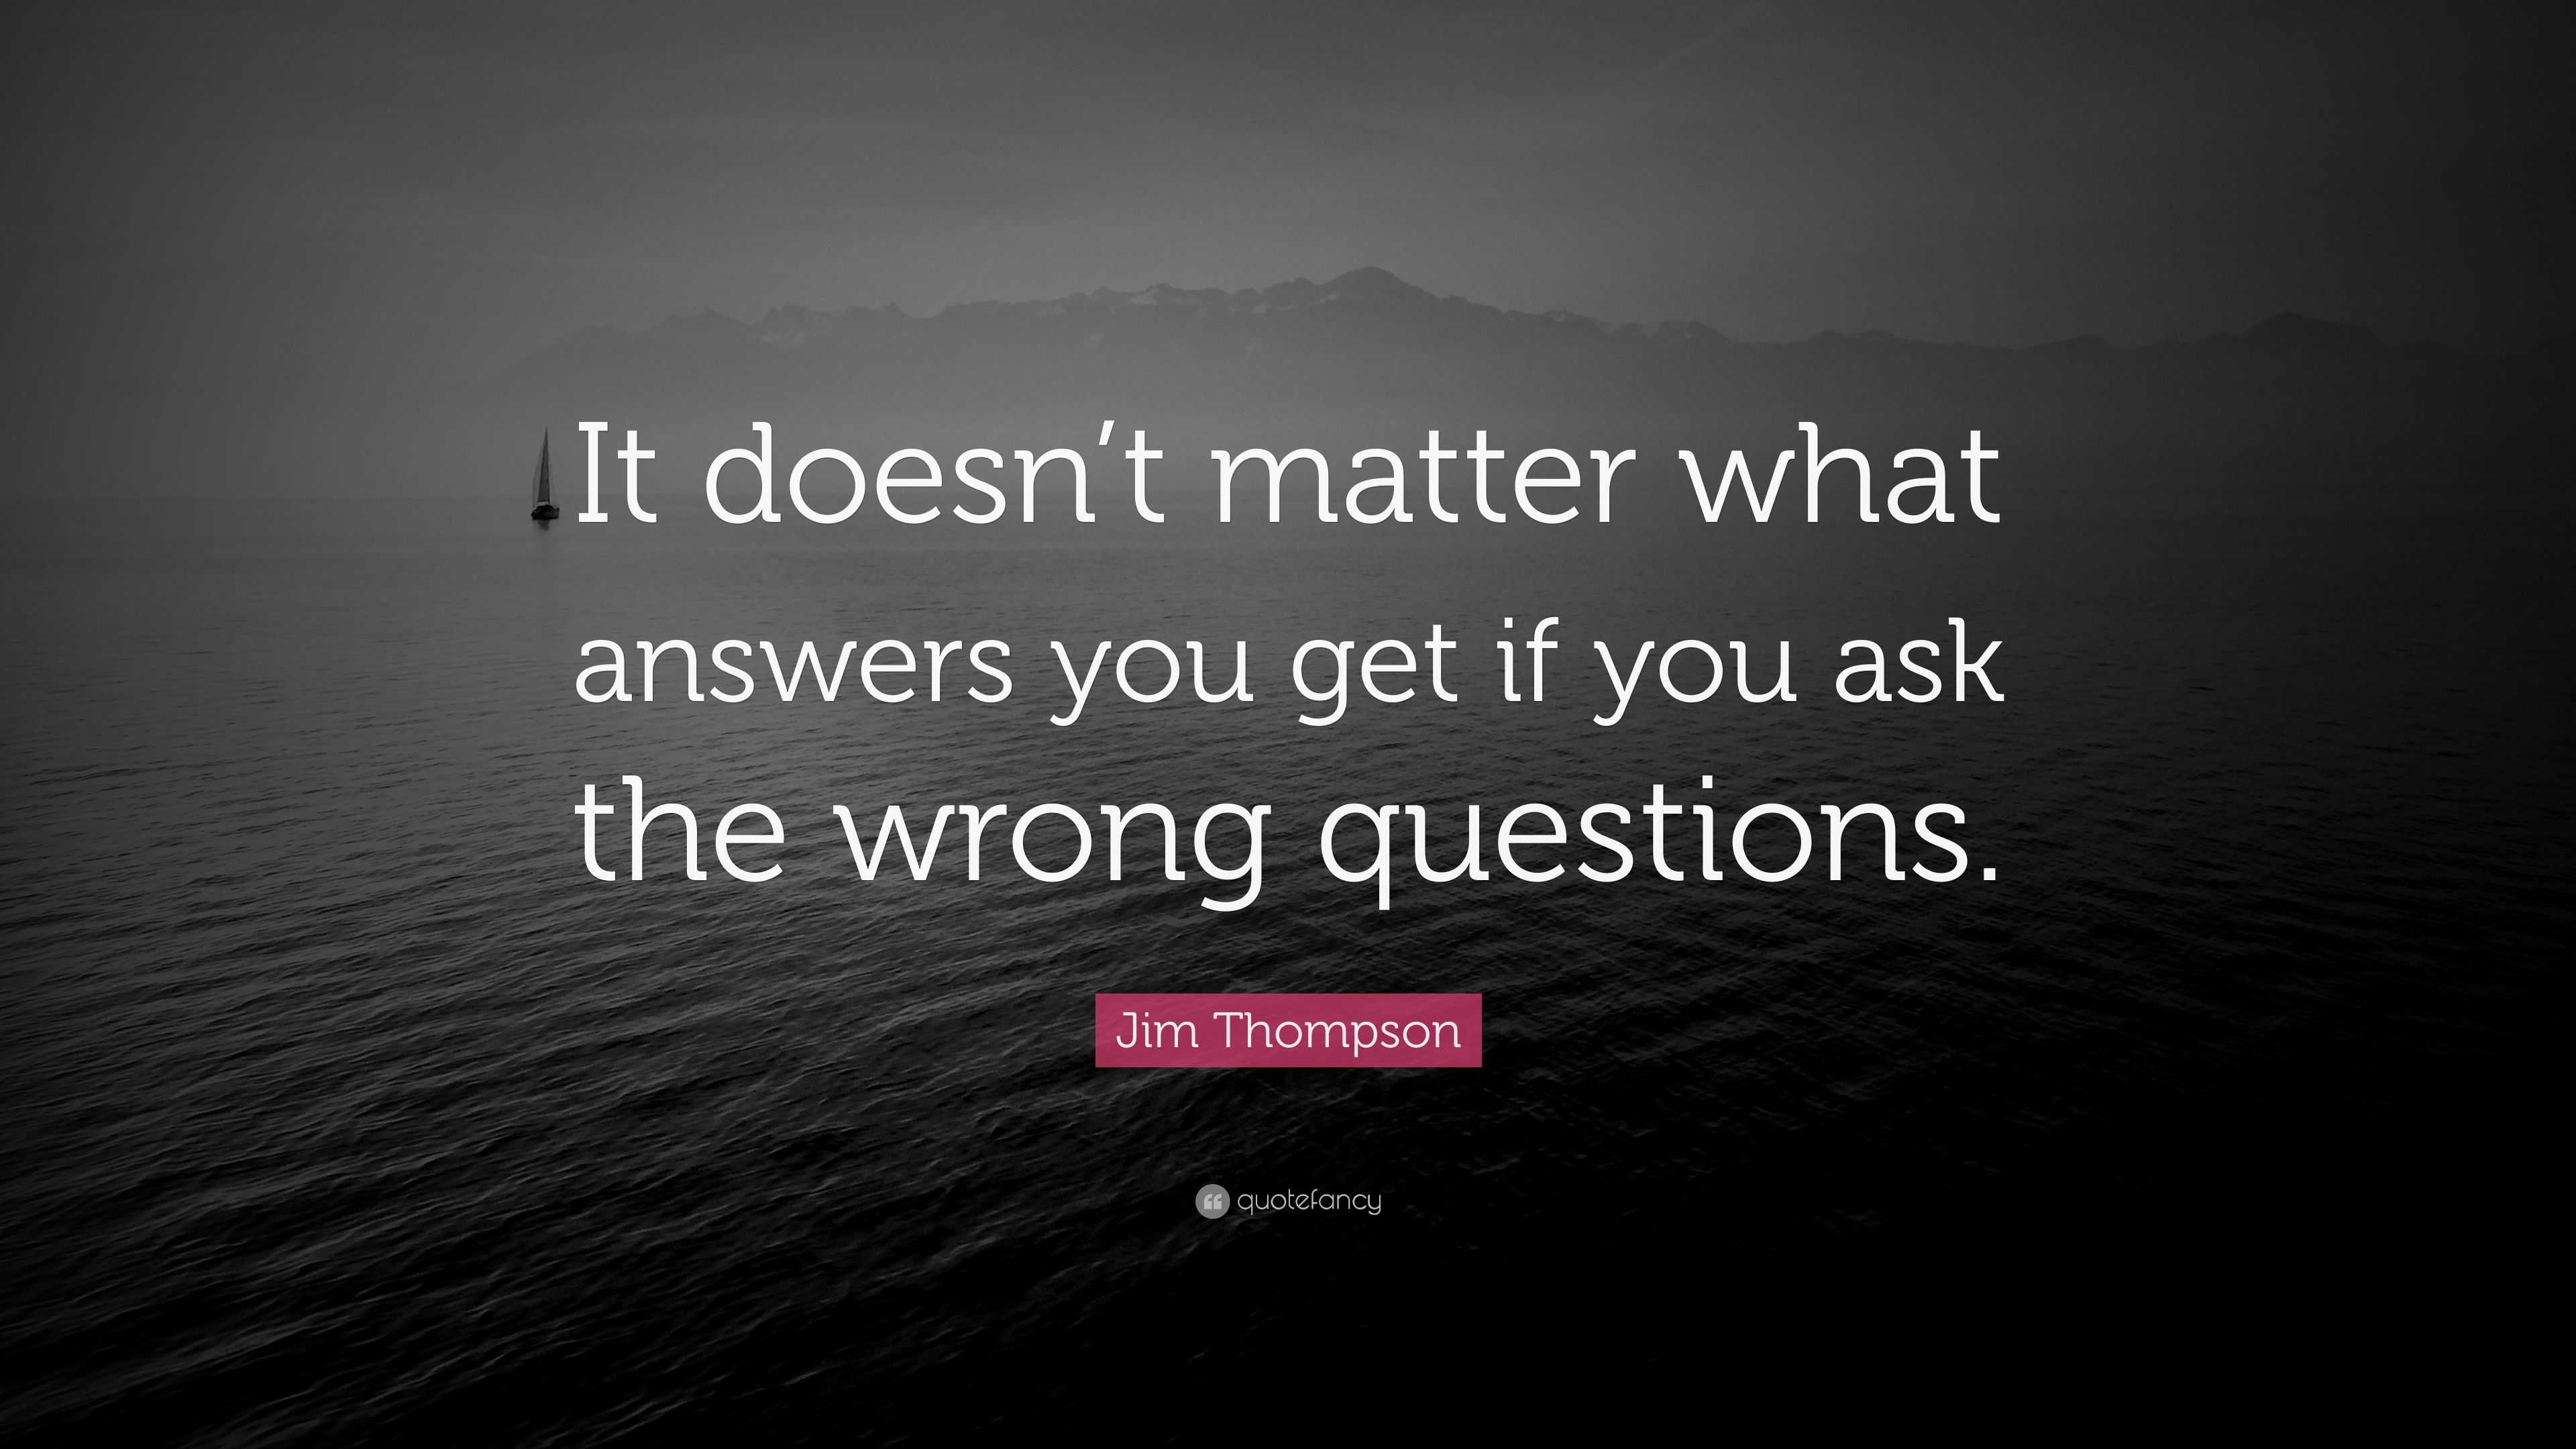 Jim Thompson Quote “it Doesnt Matter What Answers You Get If You Ask The Wrong Questions” 5577